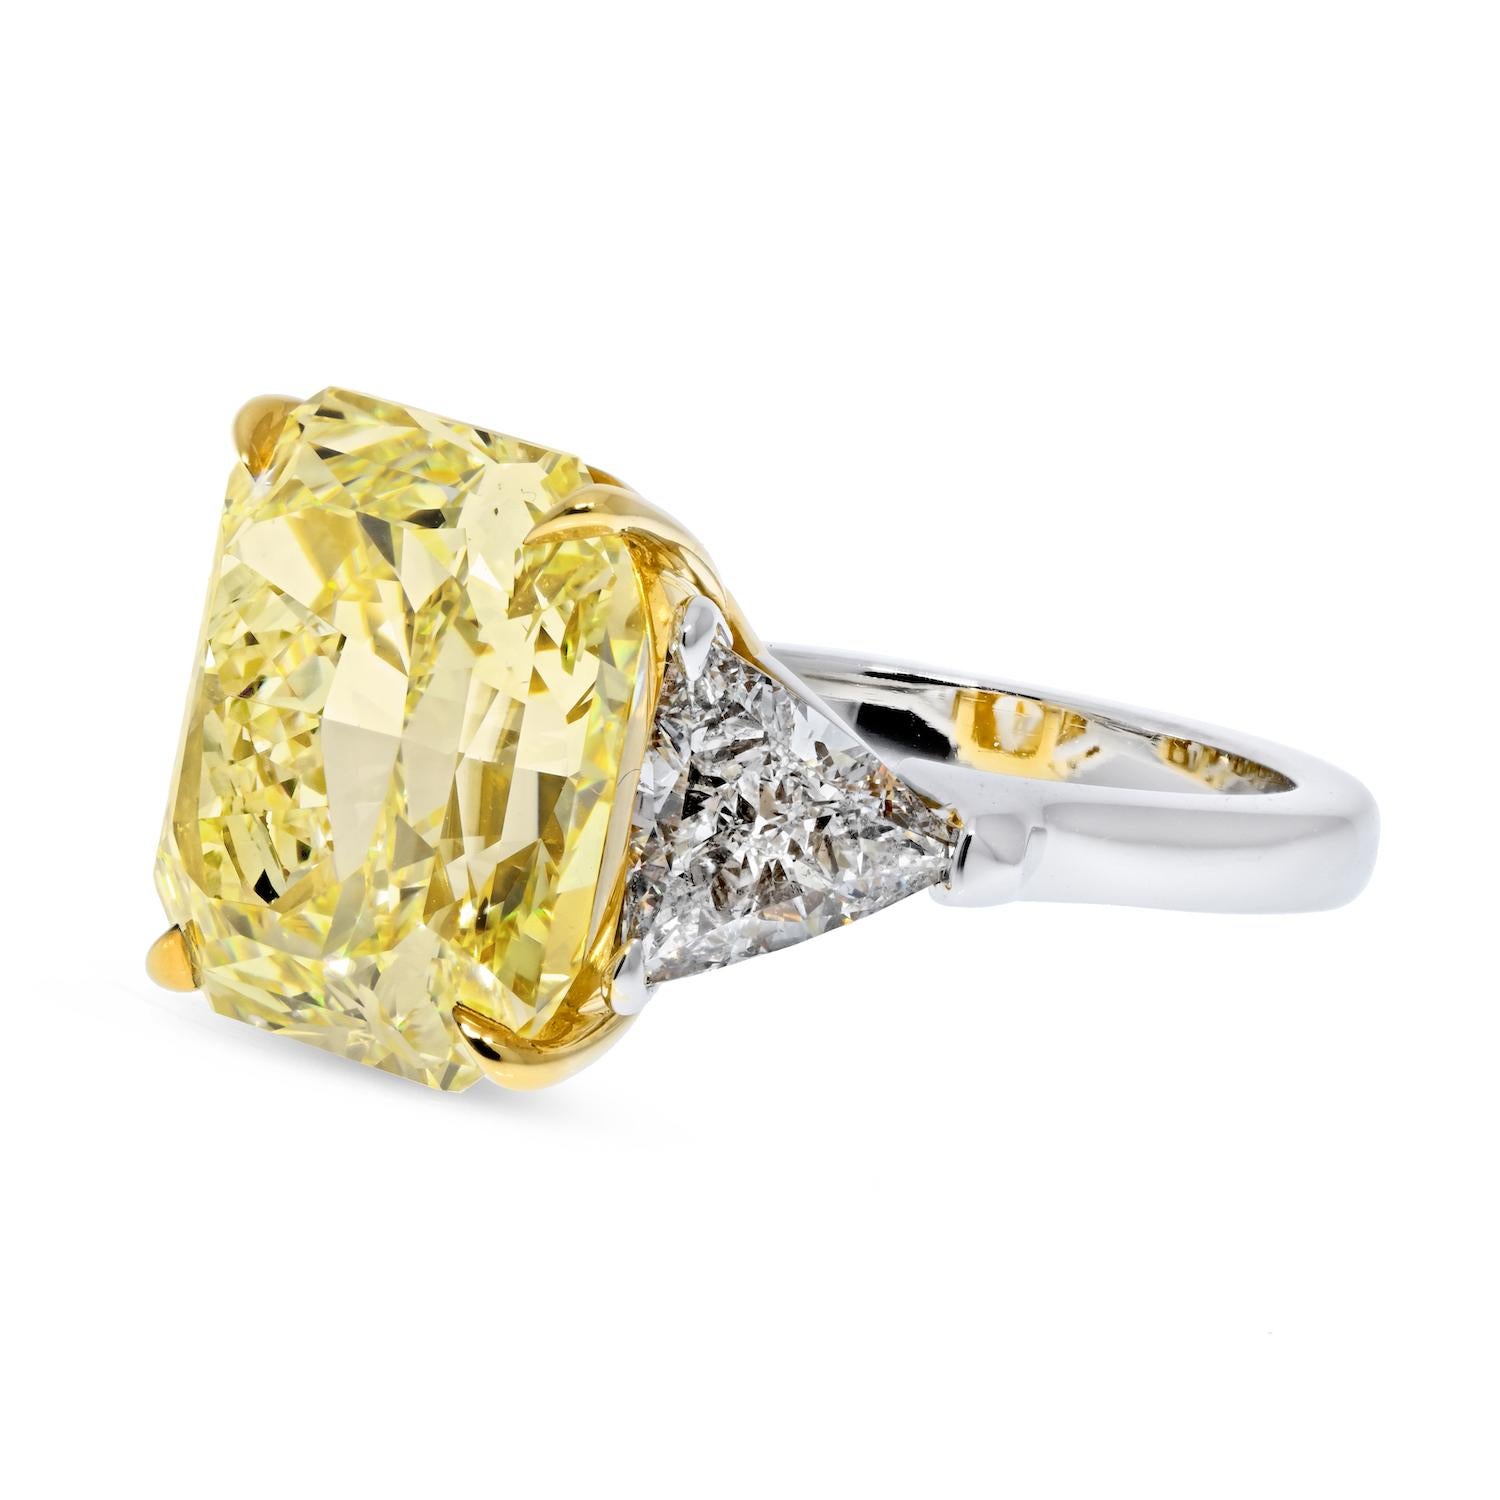 Three stone diamond engagement ring crafted in platinum and 18k yellow gold, mounted with a 10.98 carat Radiant Cut Fancy Yellow Diamond, just two points shy of a full 11 carat. It is GIA certified as Fancy Yellow color, VVS2 clarity. 

Accented